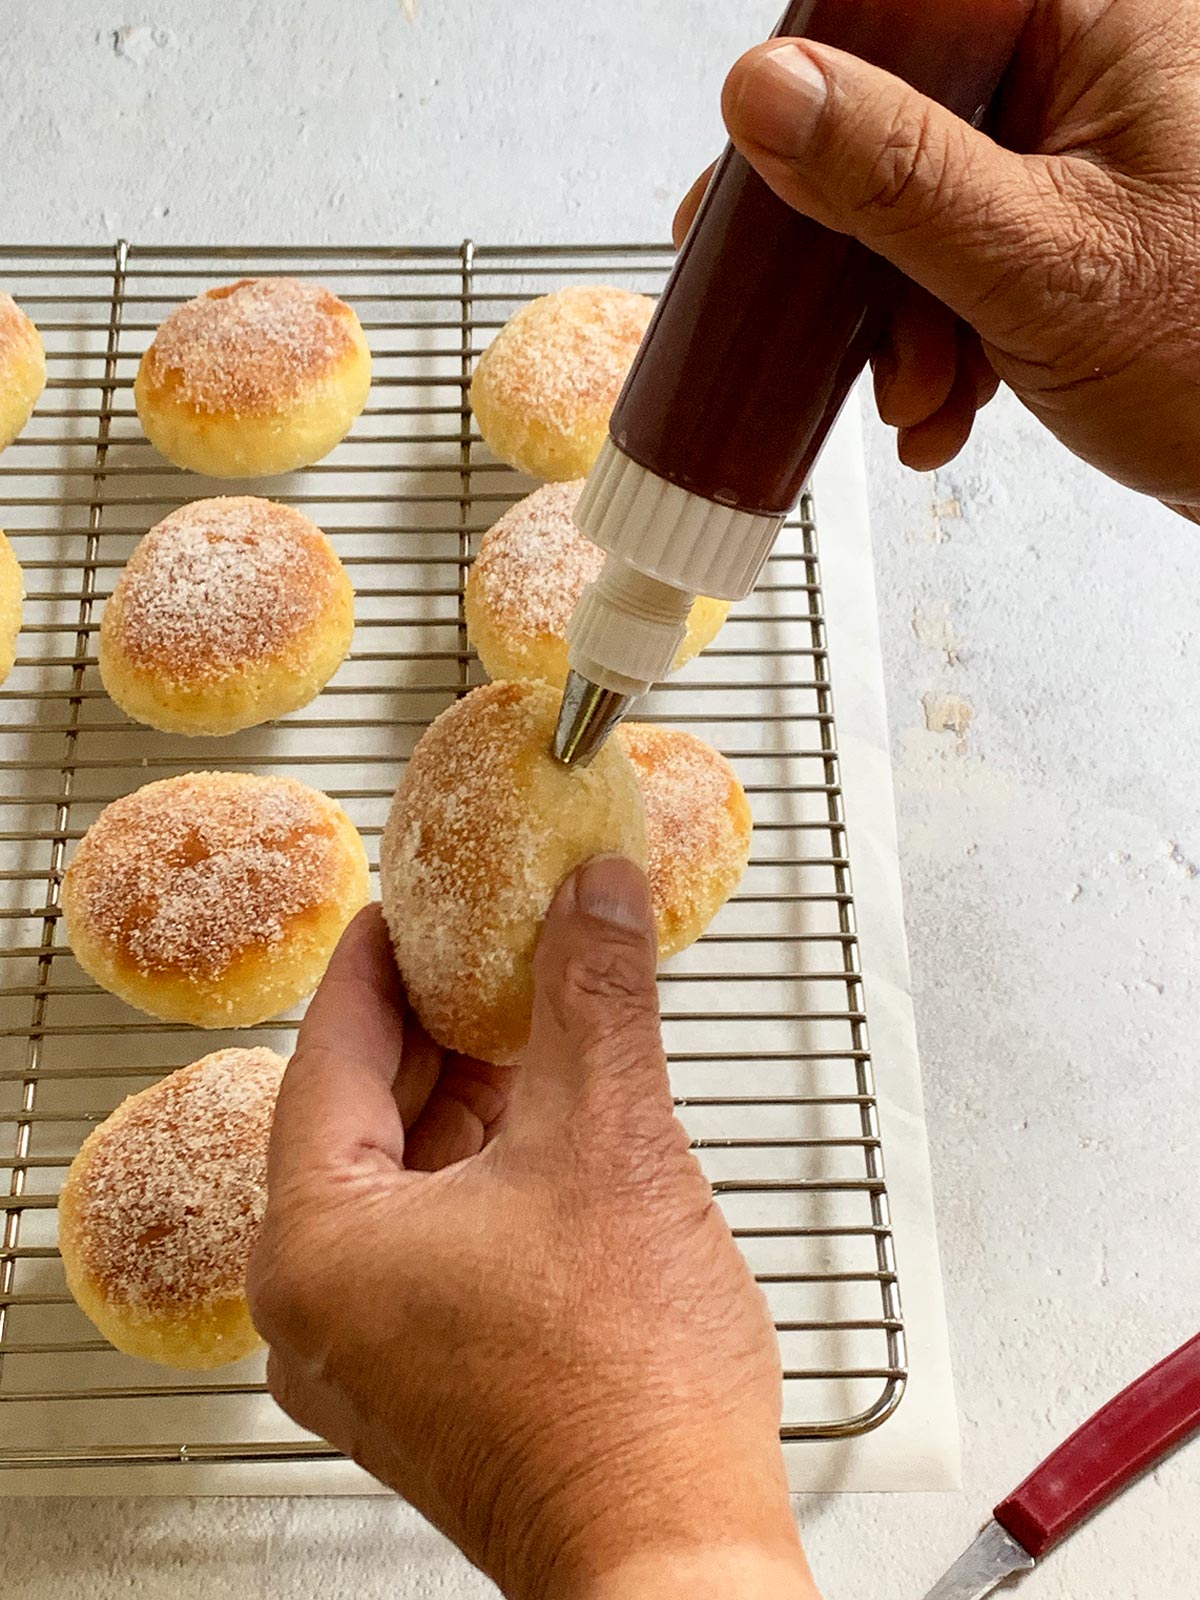 Squeezing jam into a baked sufganiyot.